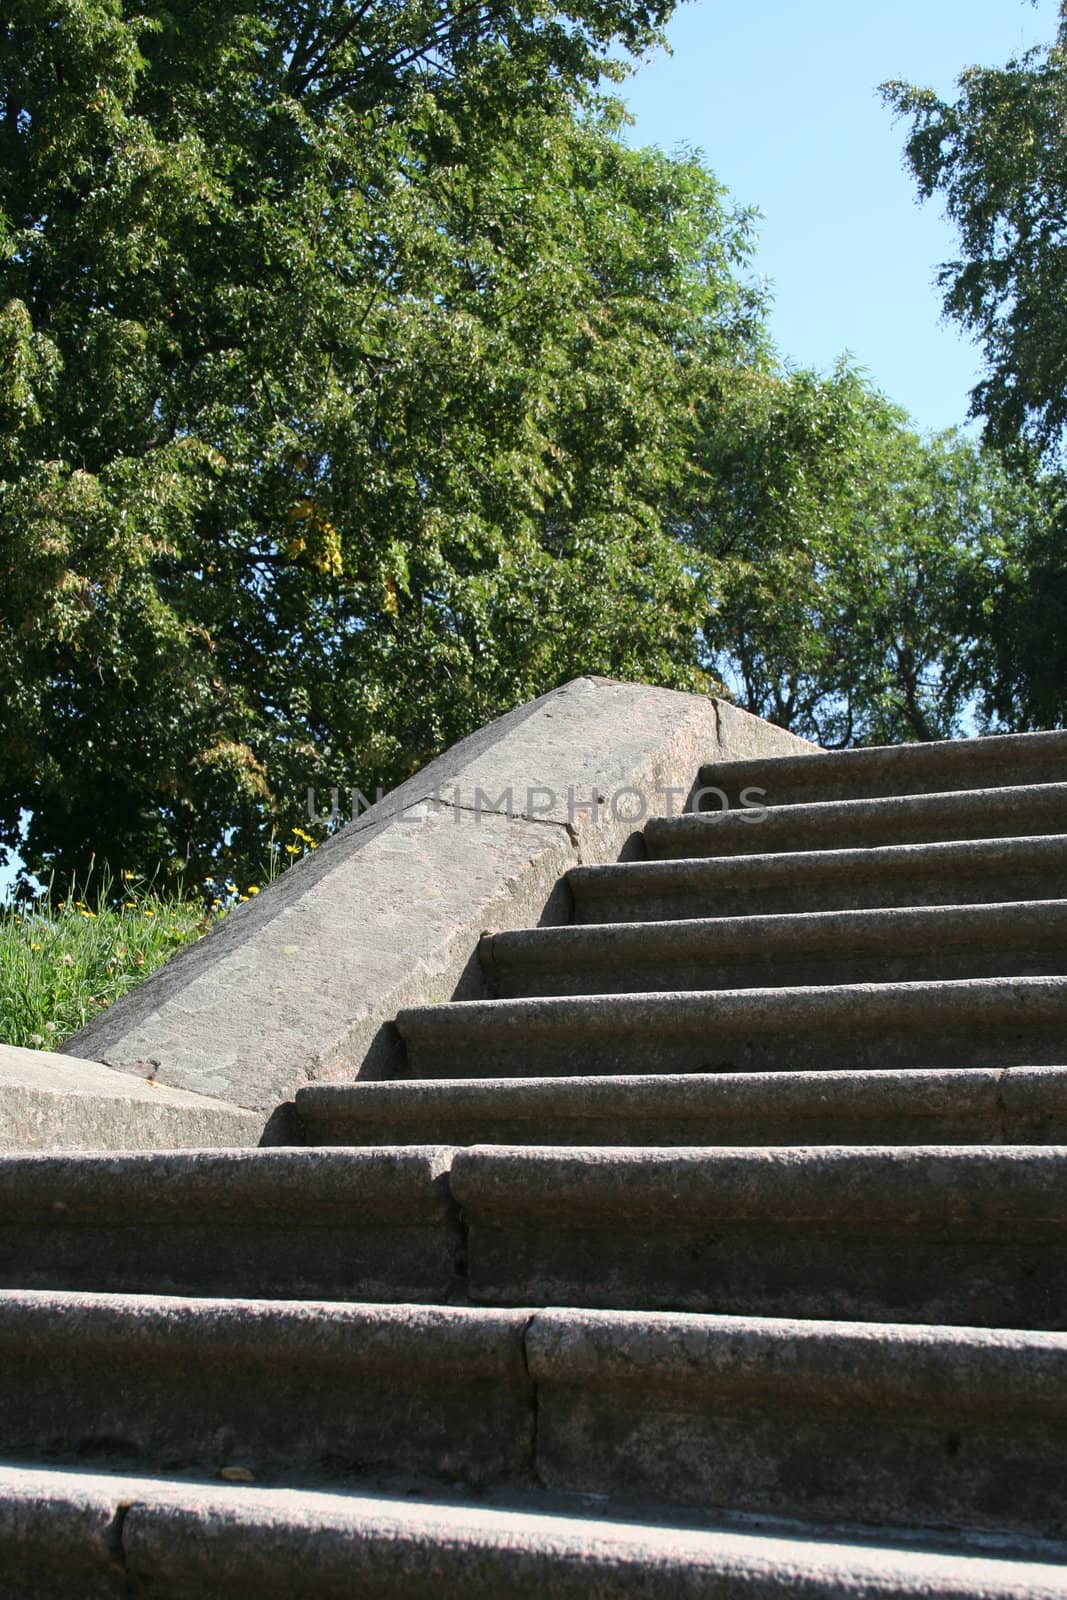 stony staircase in the park
